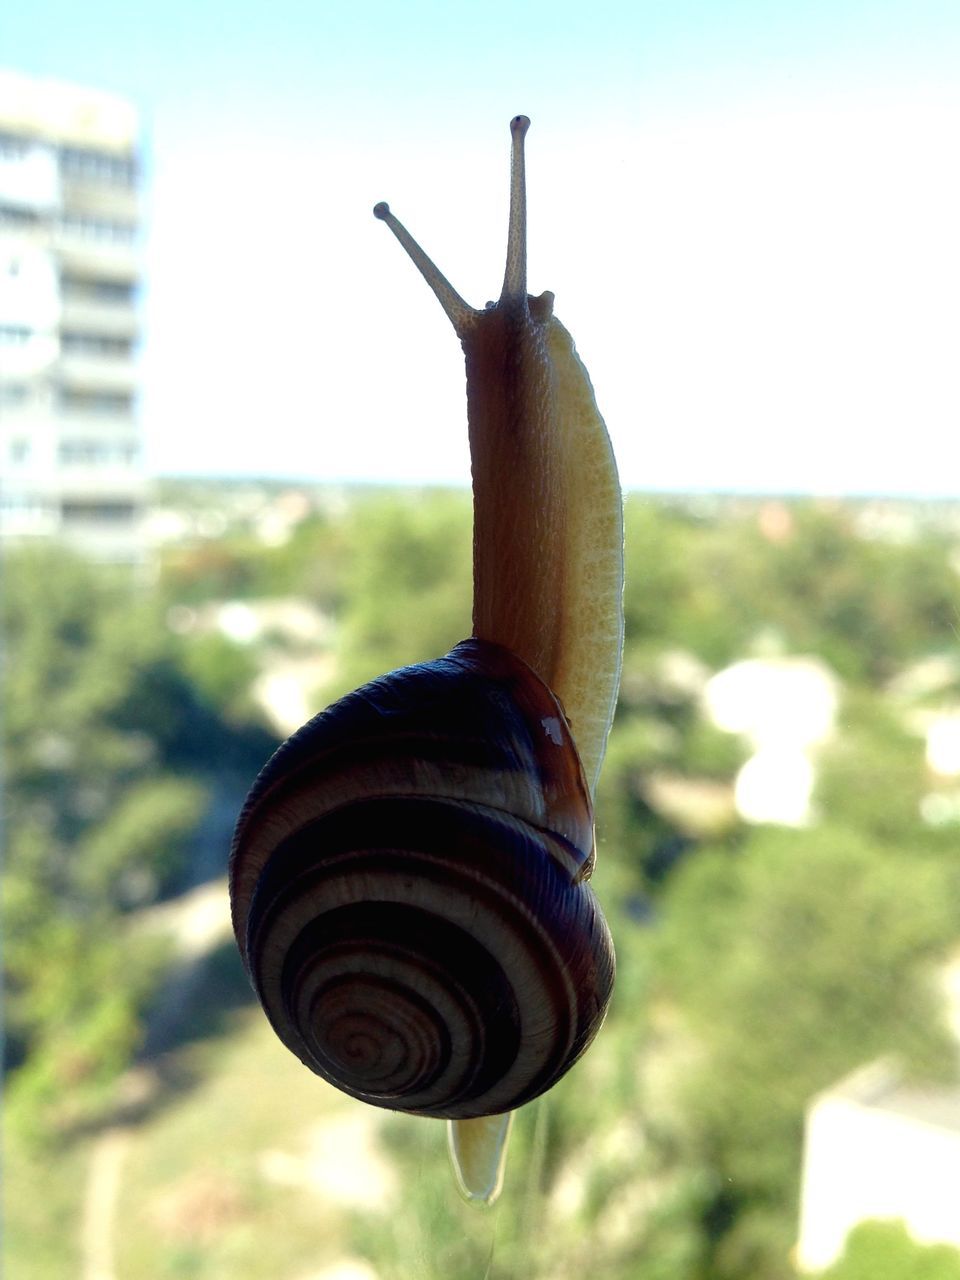 snail, one animal, focus on foreground, animal themes, gastropod, close-up, day, no people, outdoors, nature, fragility